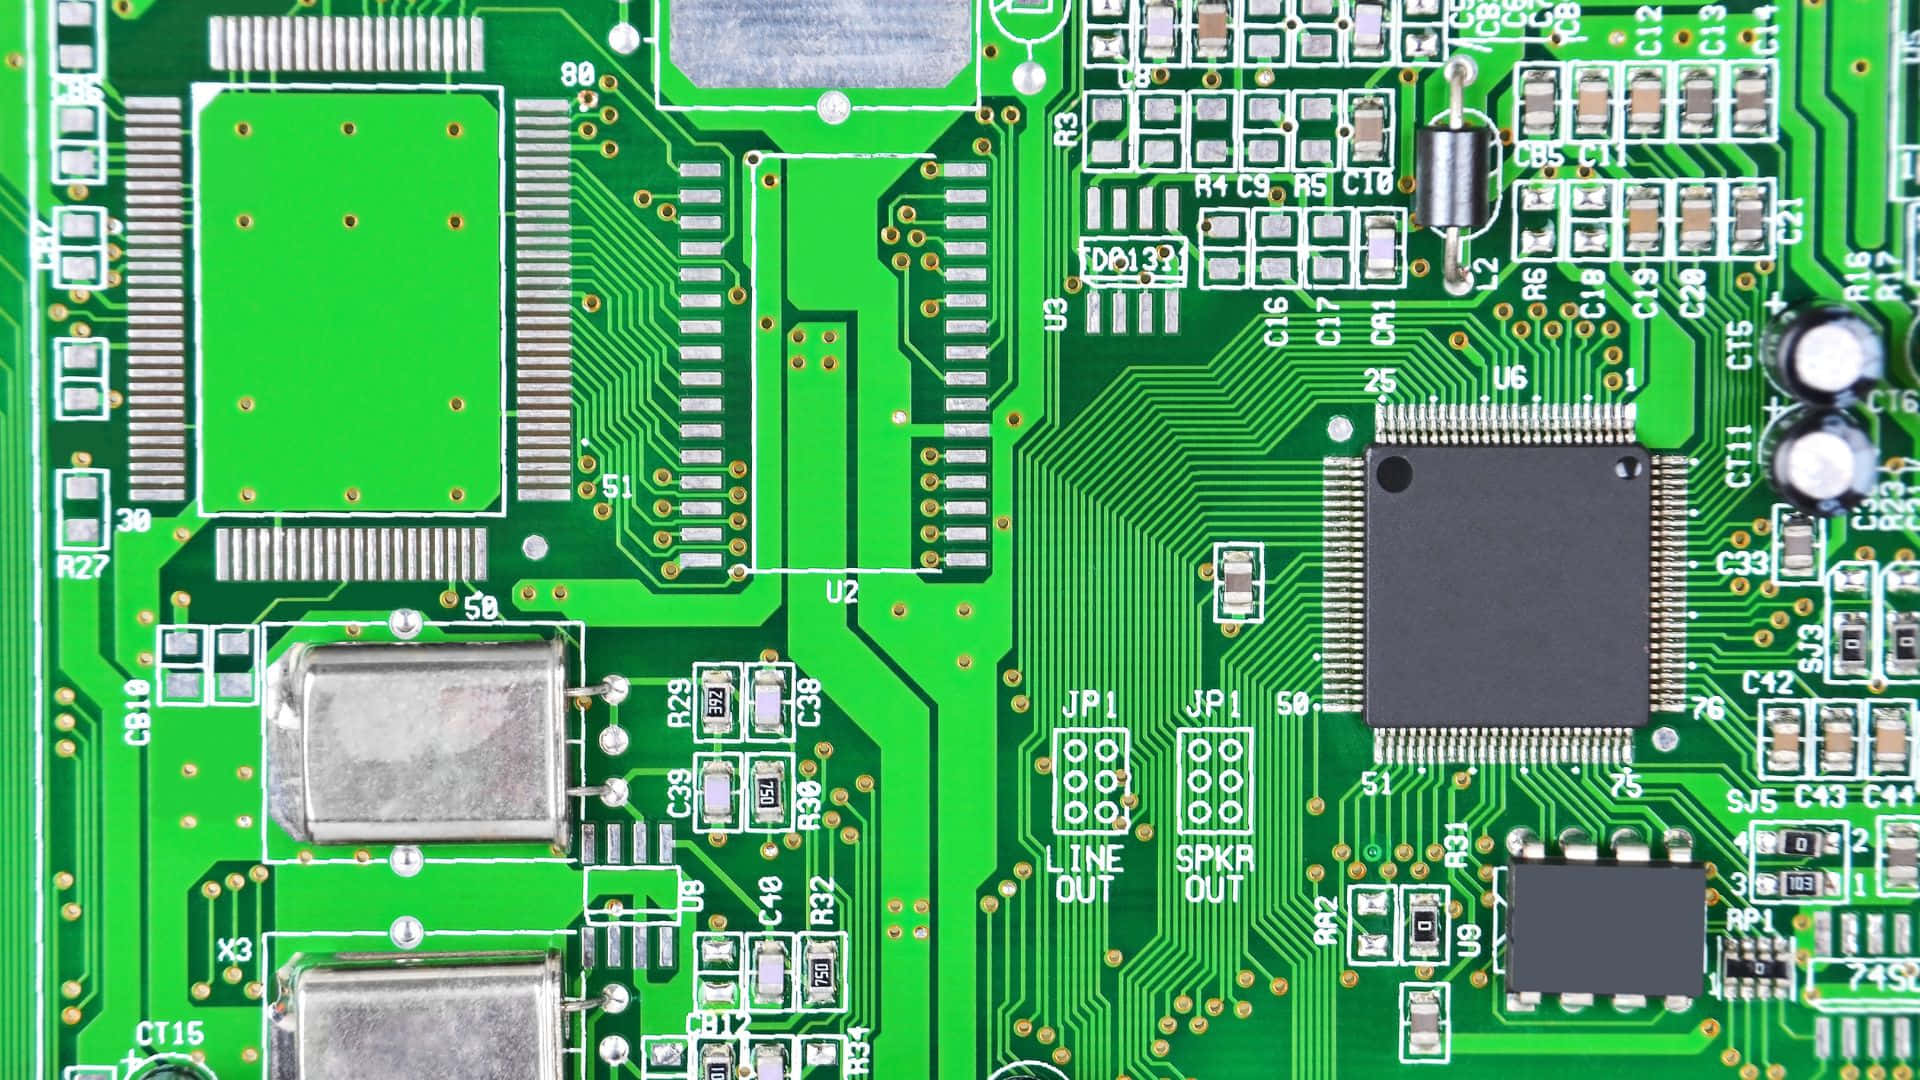 A close up view of a modern circuit board technology